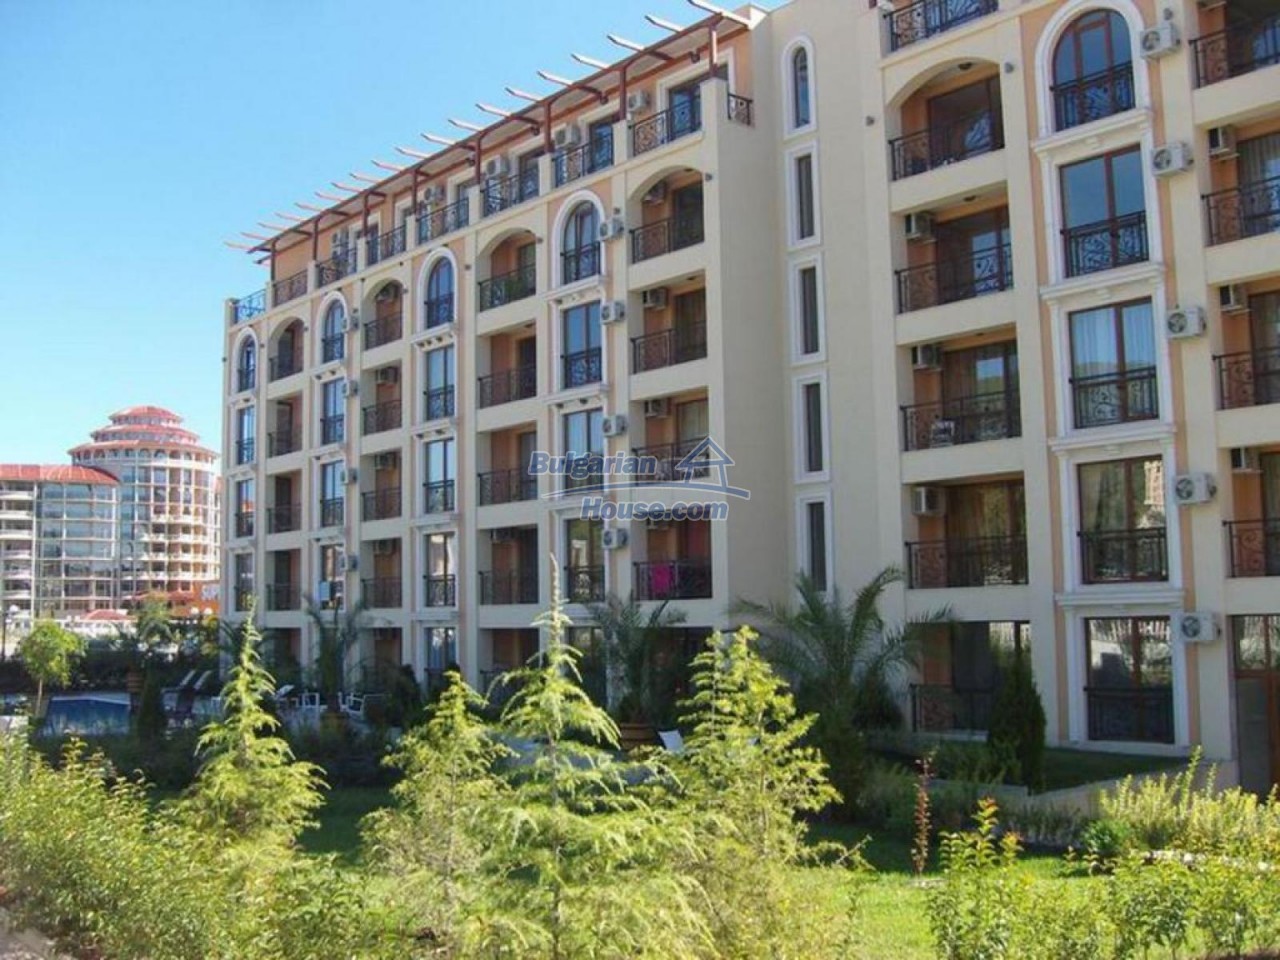 13751:1 - Studio apartment for sale  in Elenite 200 meters from the sea 